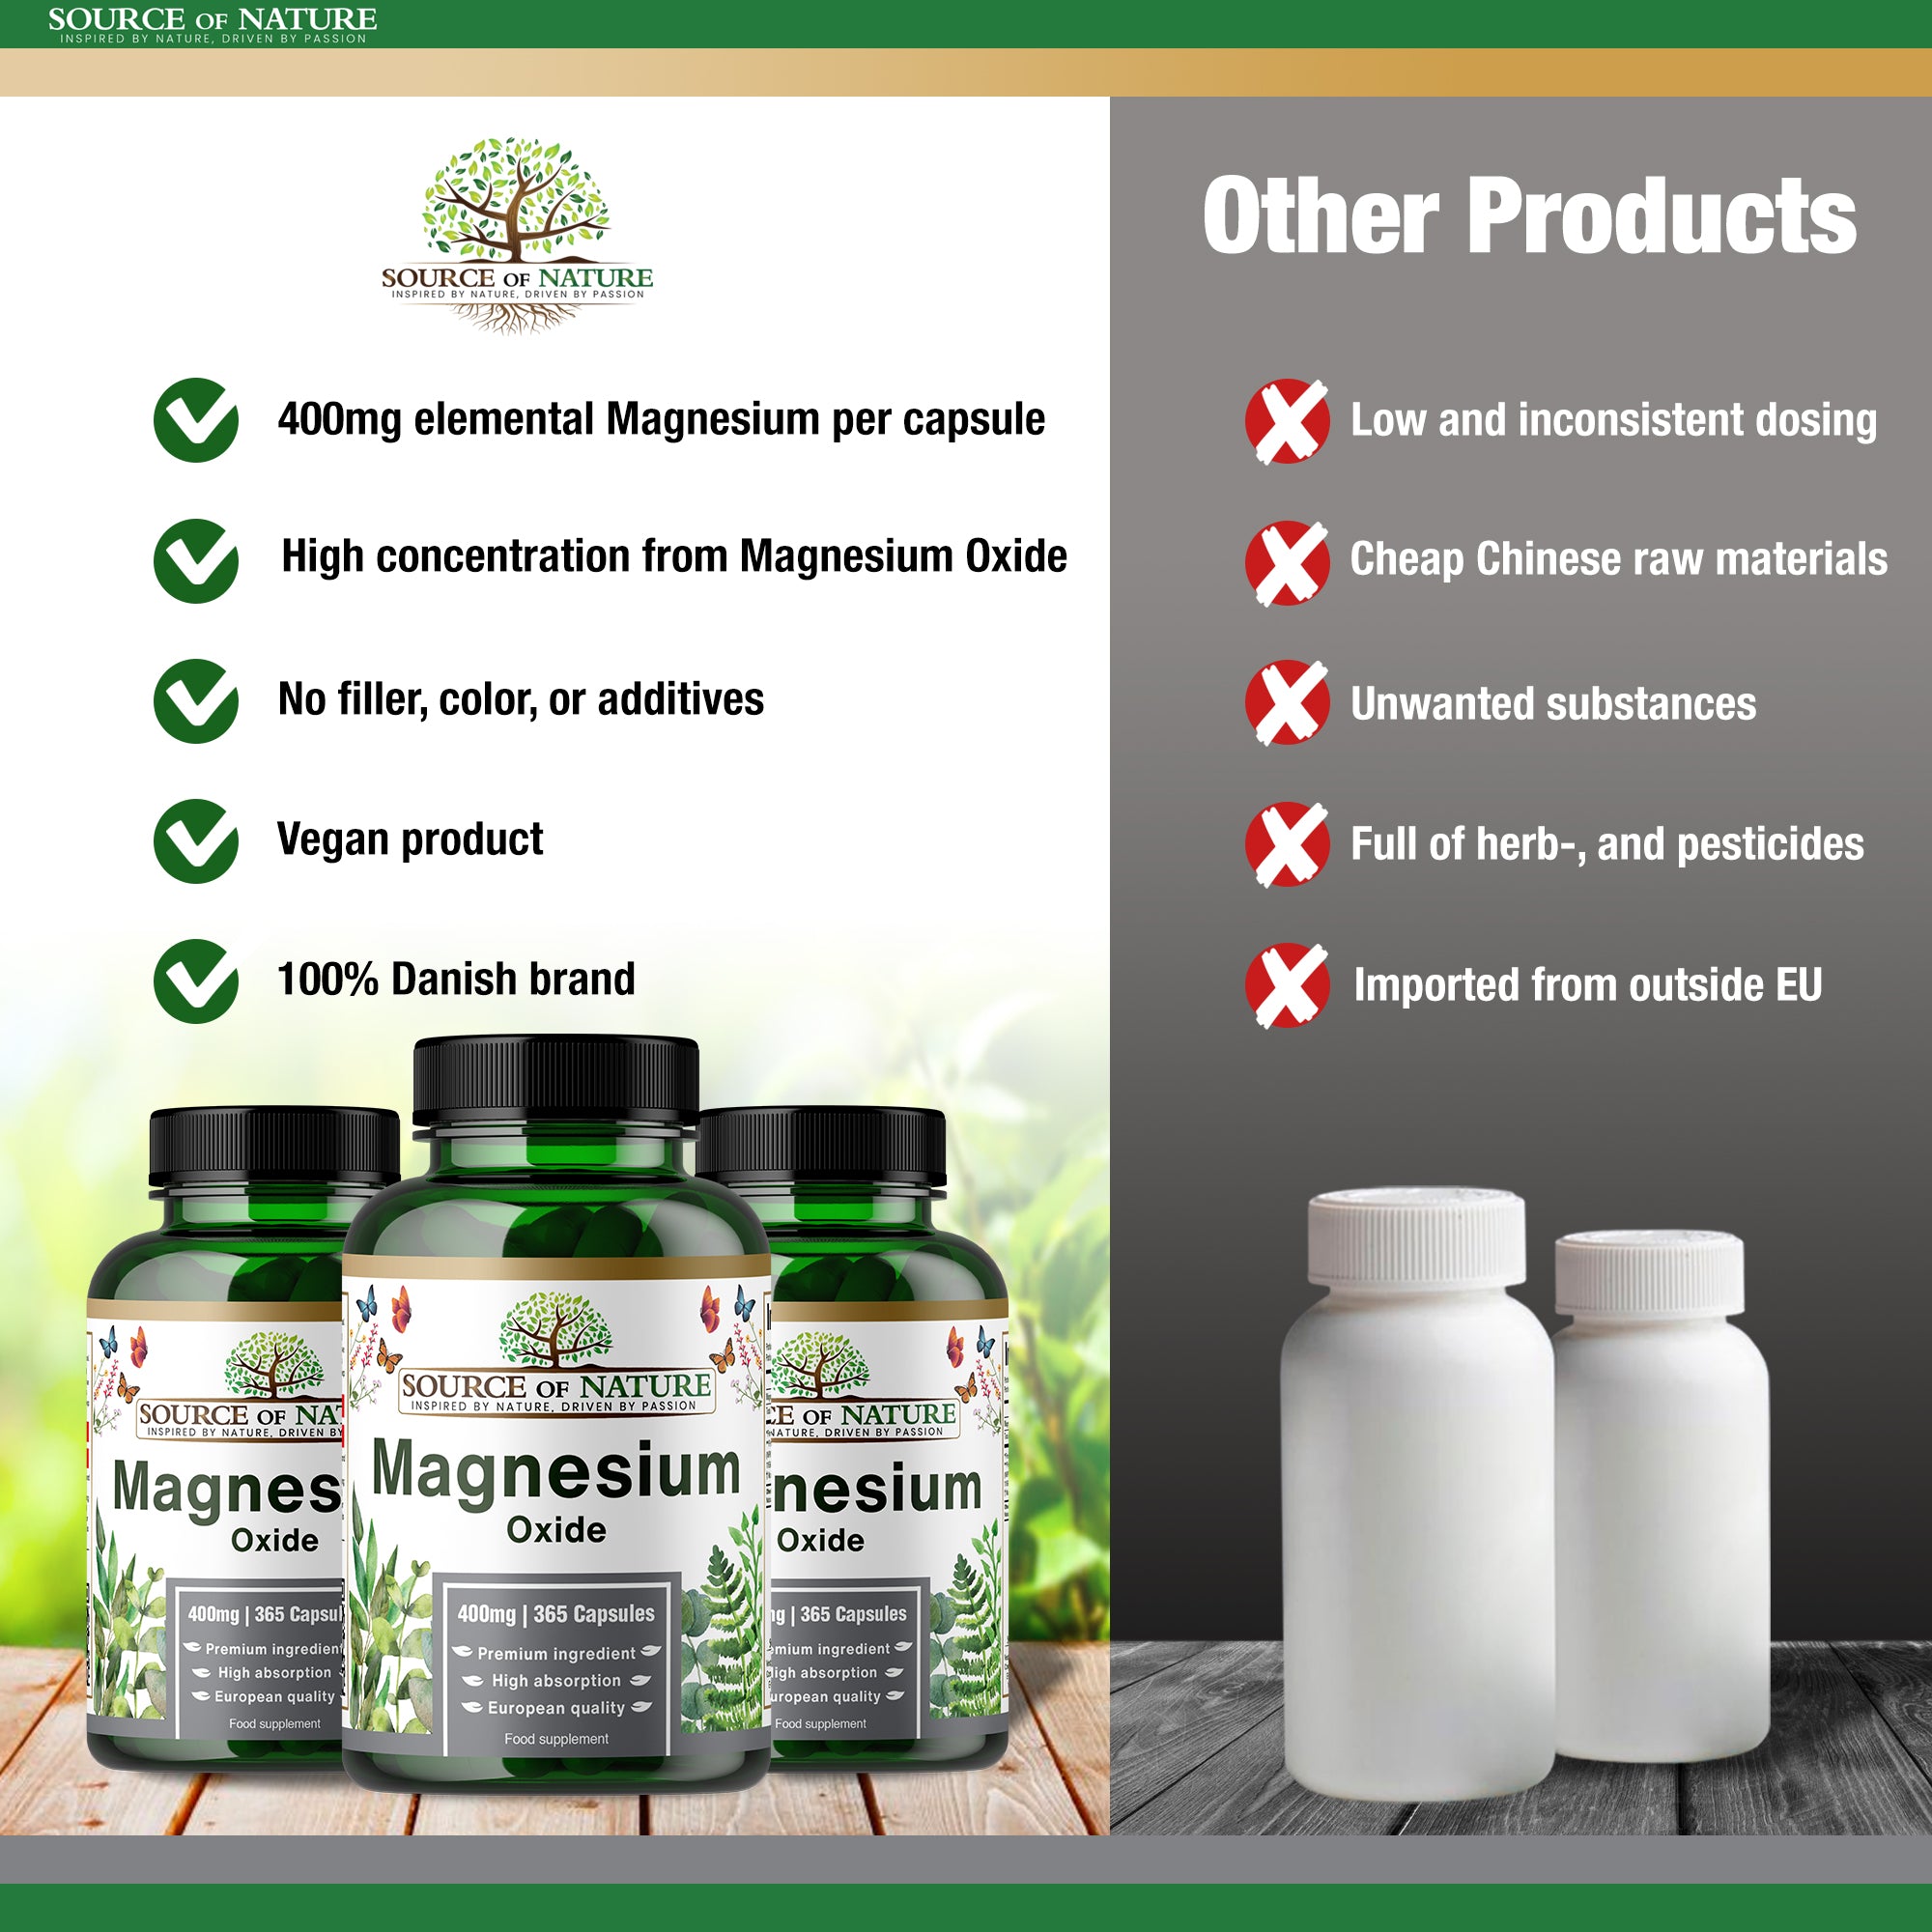 Magnesium Oxide 665mg | 365 Capsules | 12-Month Supply